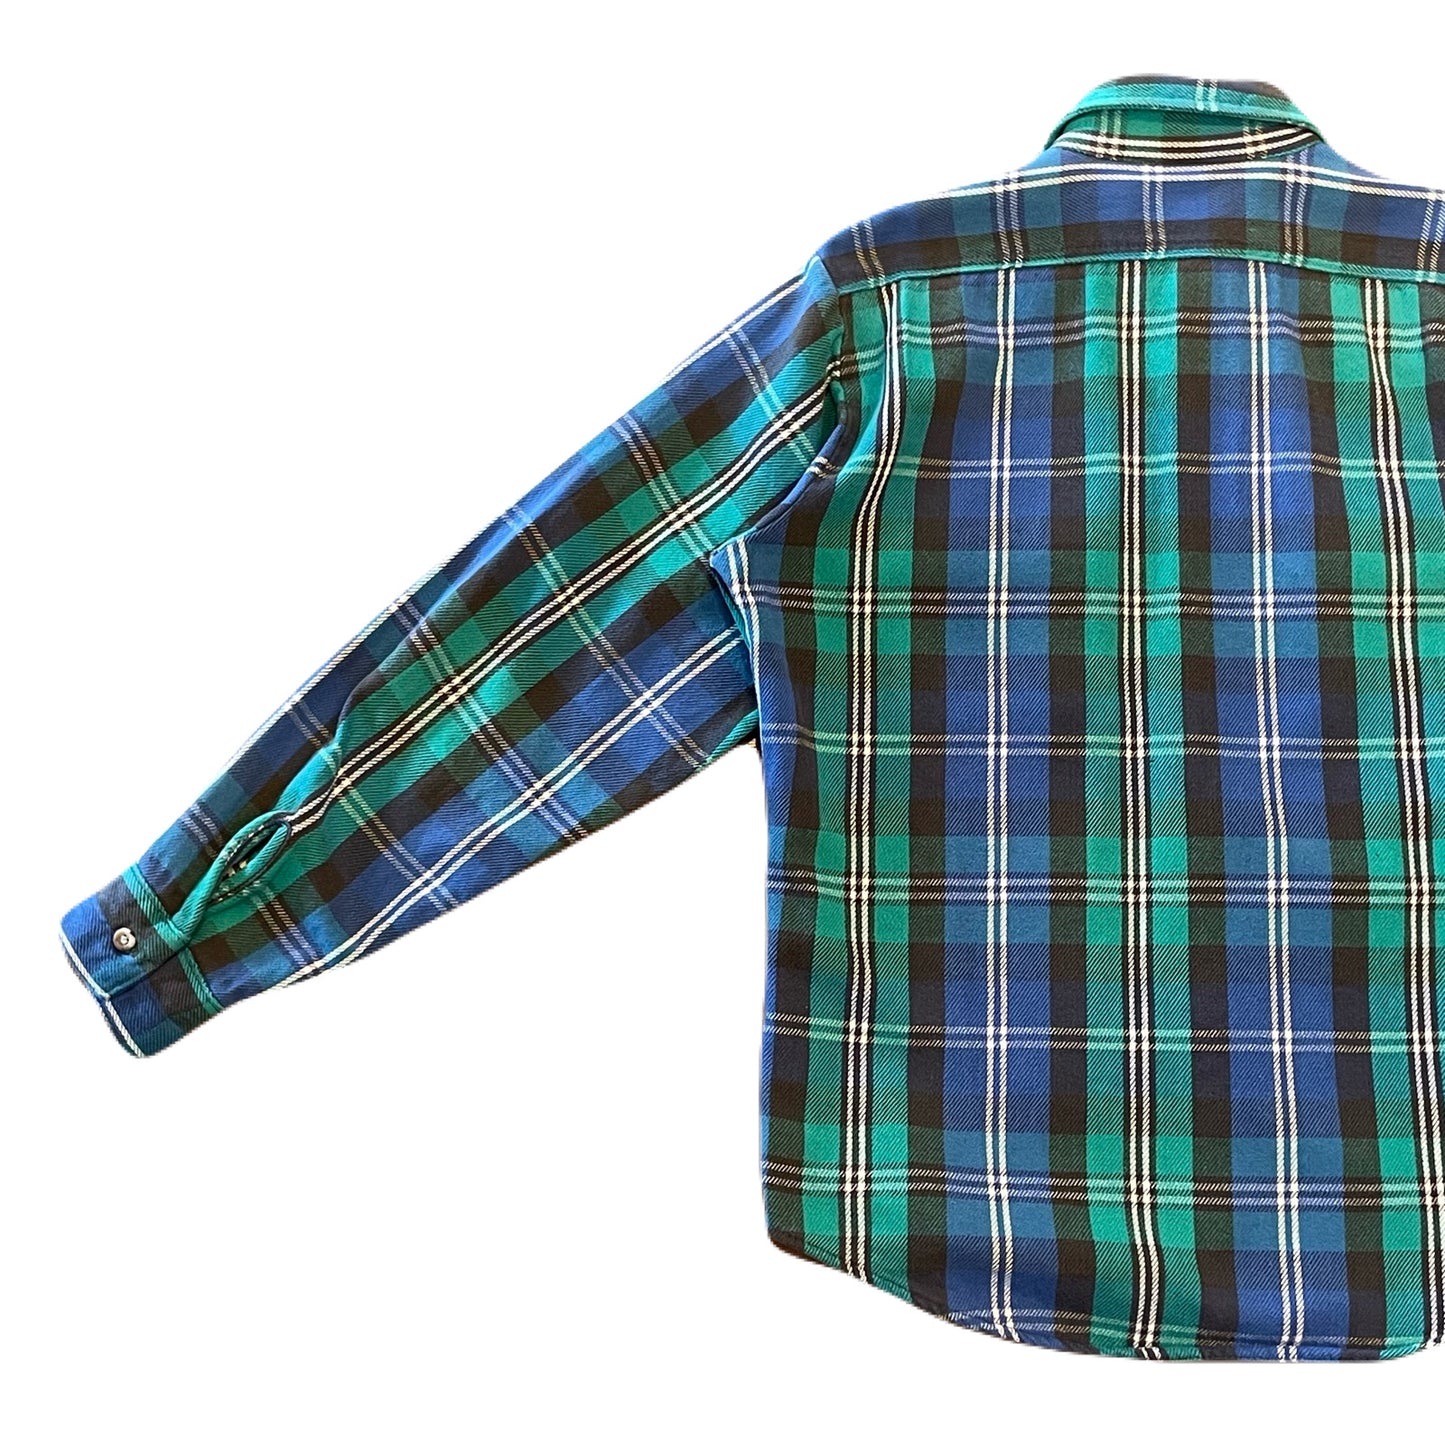 "90’s FIVE BROTHER" cotton flannel check shirt　M